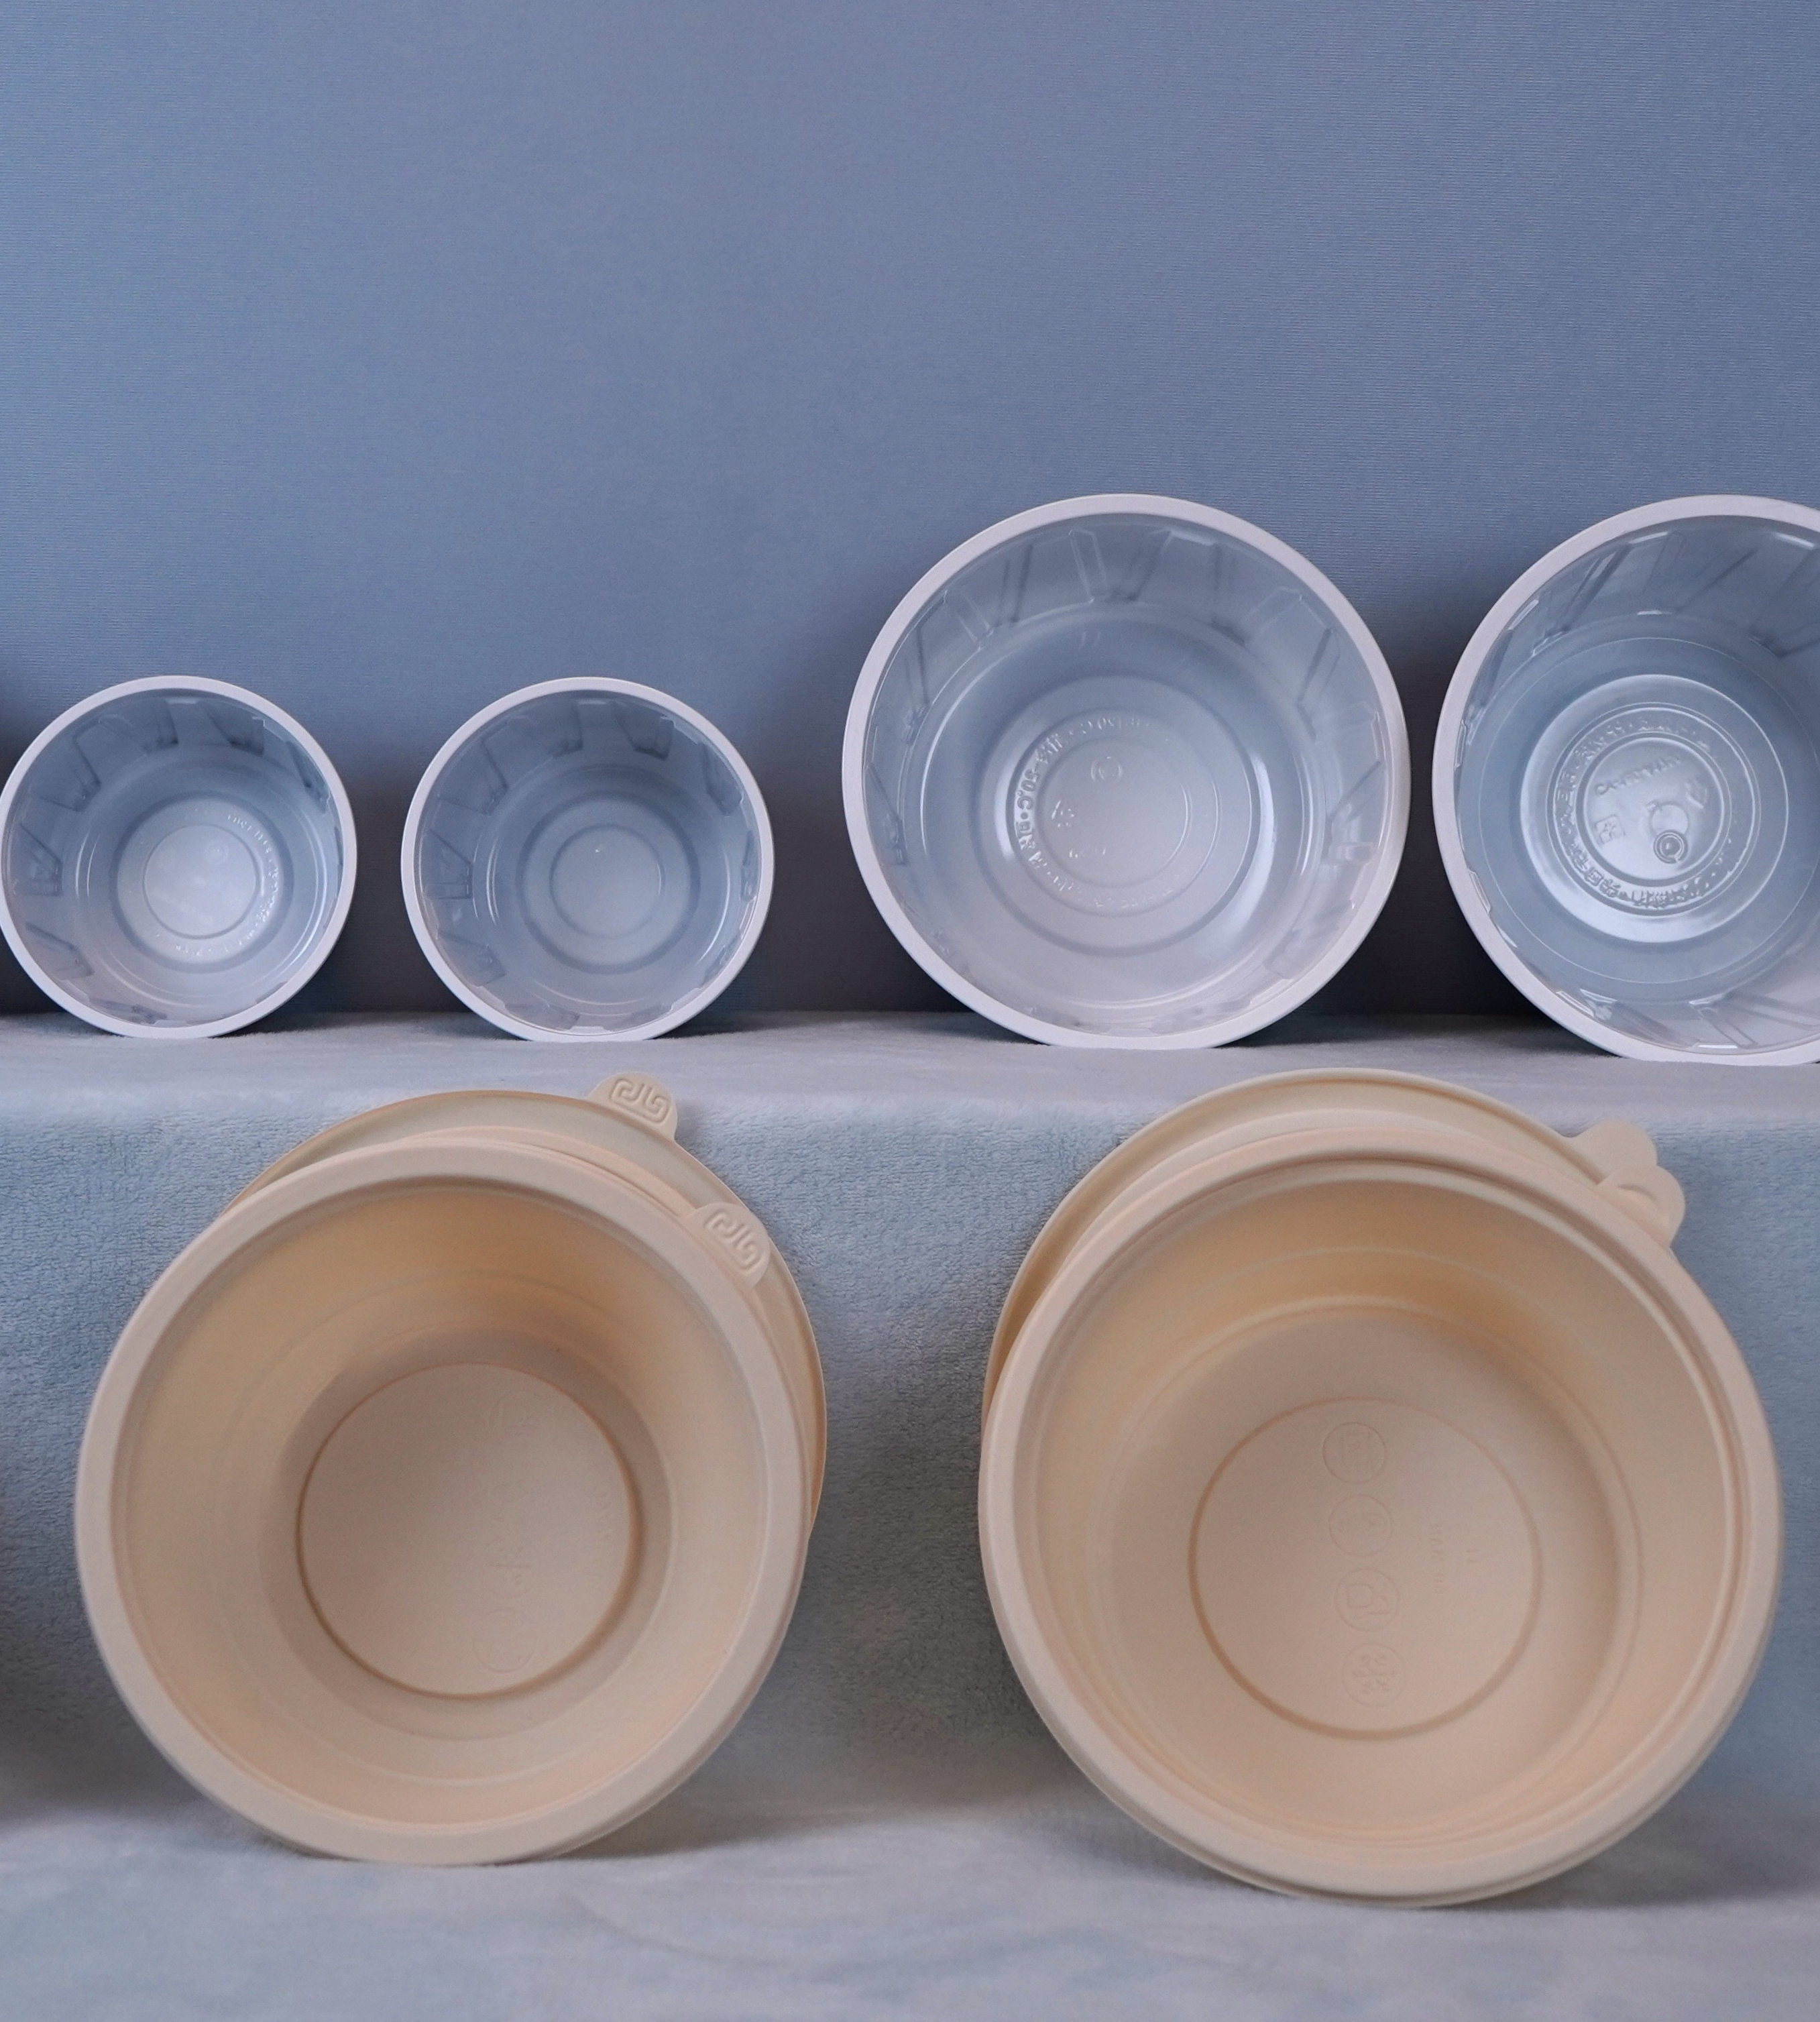 Personalized Perfection: Tailor-Made Disposable Plastic Bowls for Every Occasion